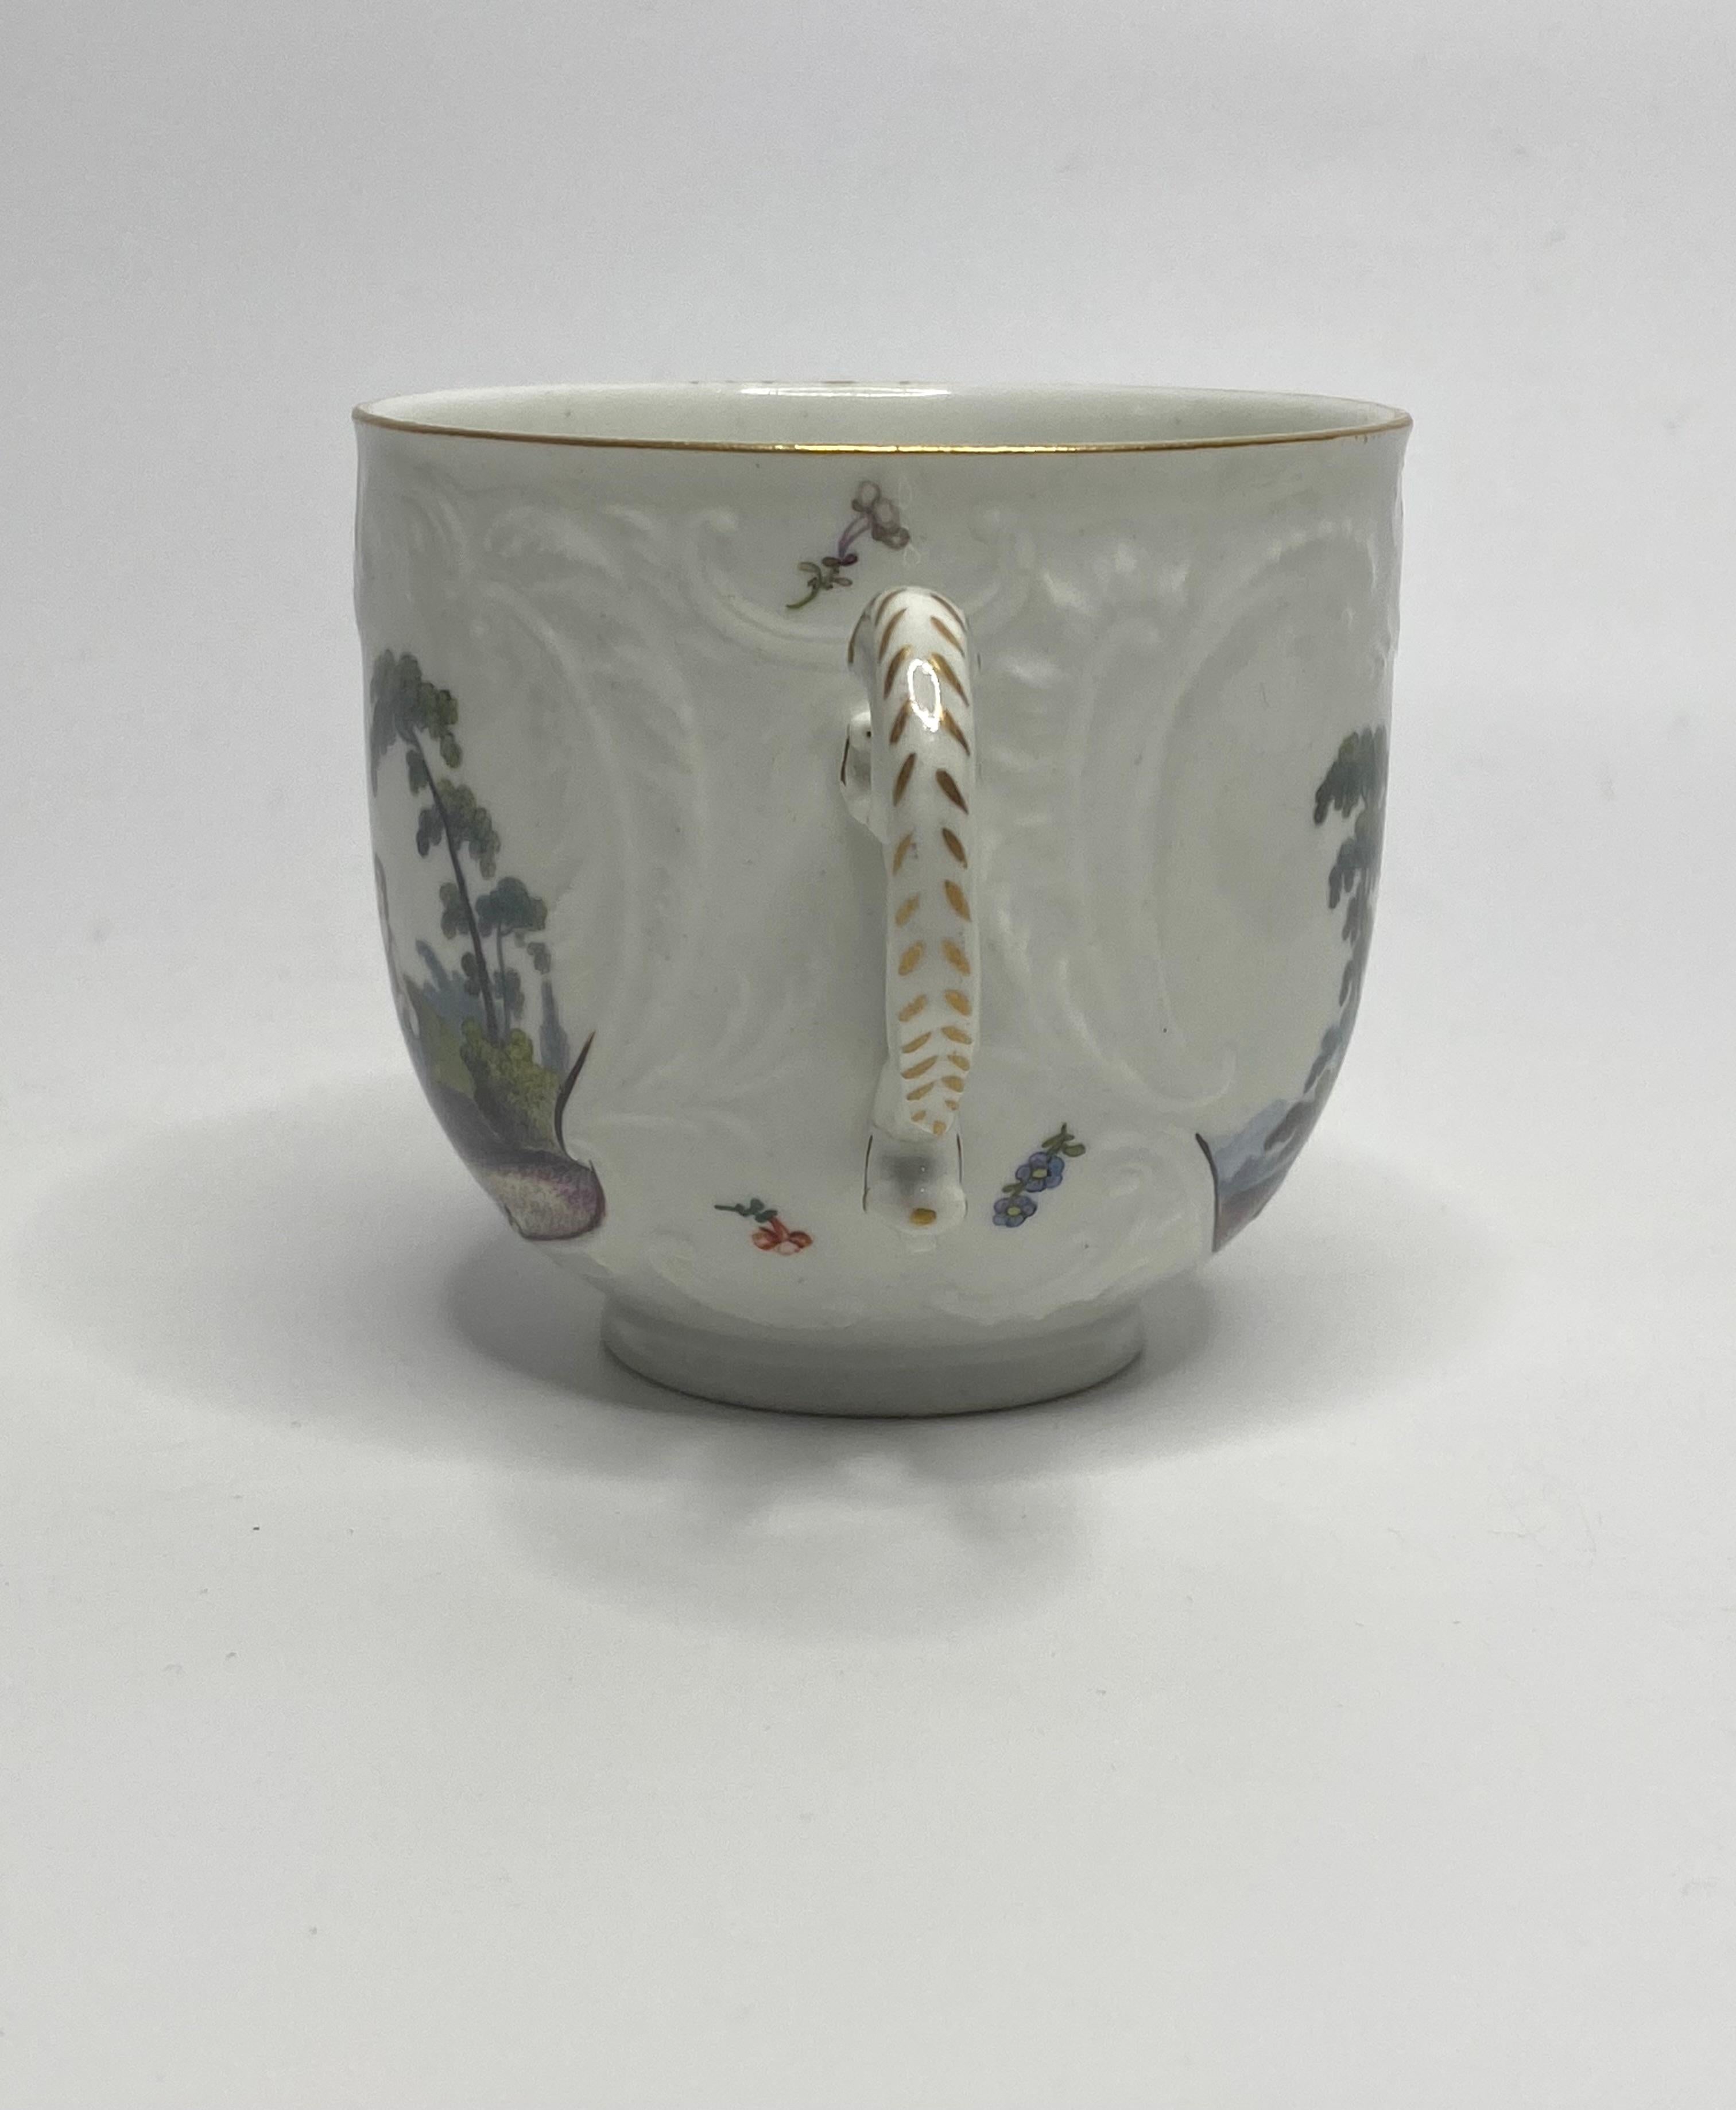 Meissen porcelain cup and saucer, c. 1740. 8